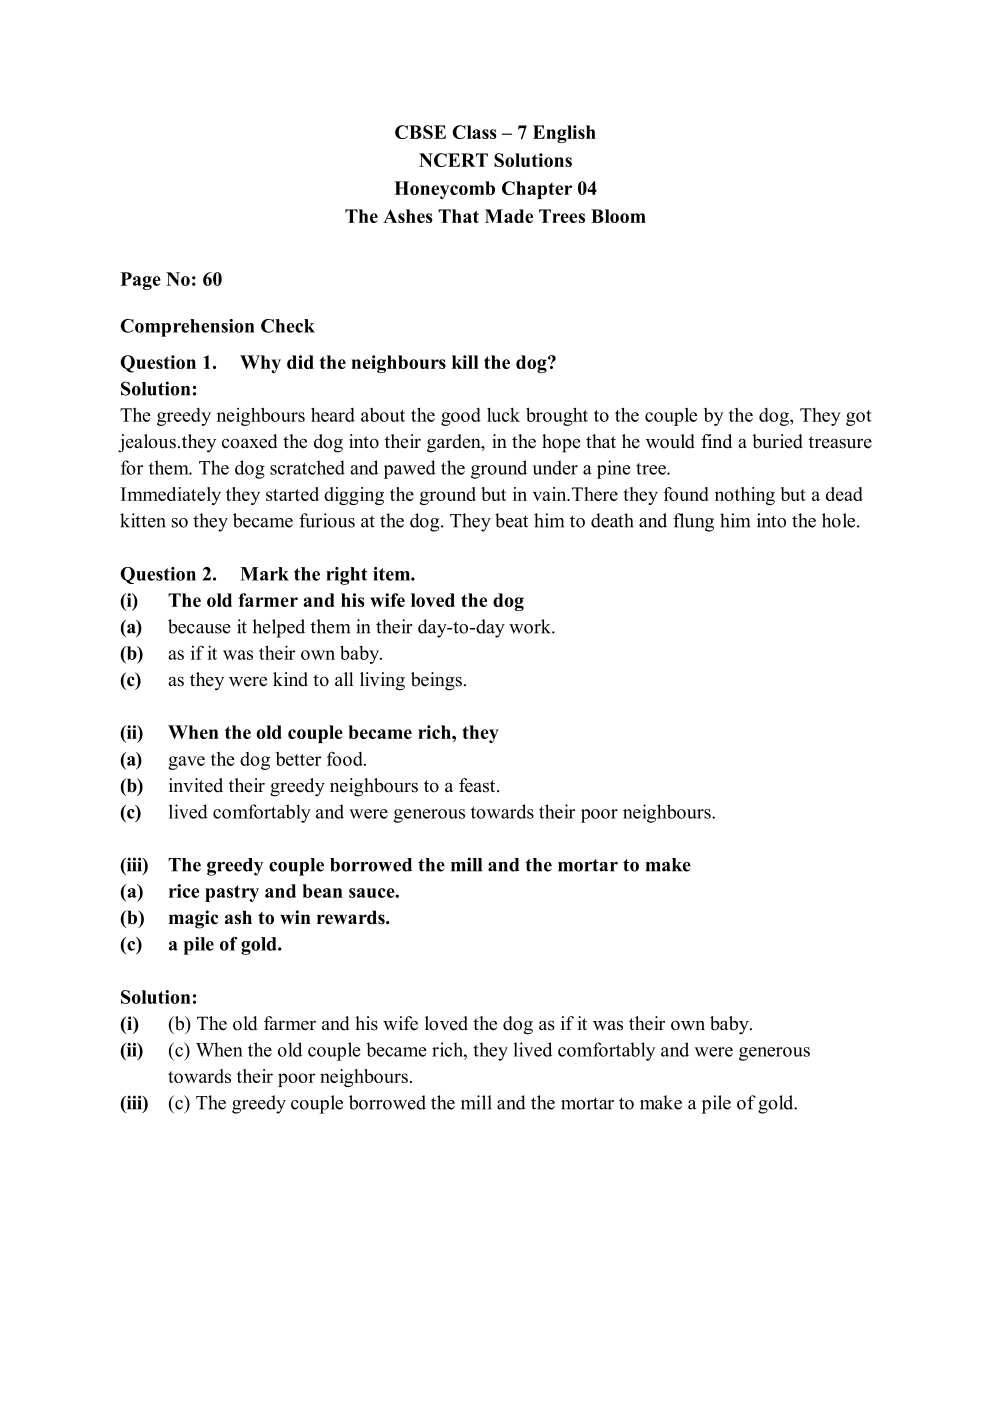 NCERT Solutions For Class 7 English Honeycomb Chapter 4 The Ashes that Made Trees Bloom